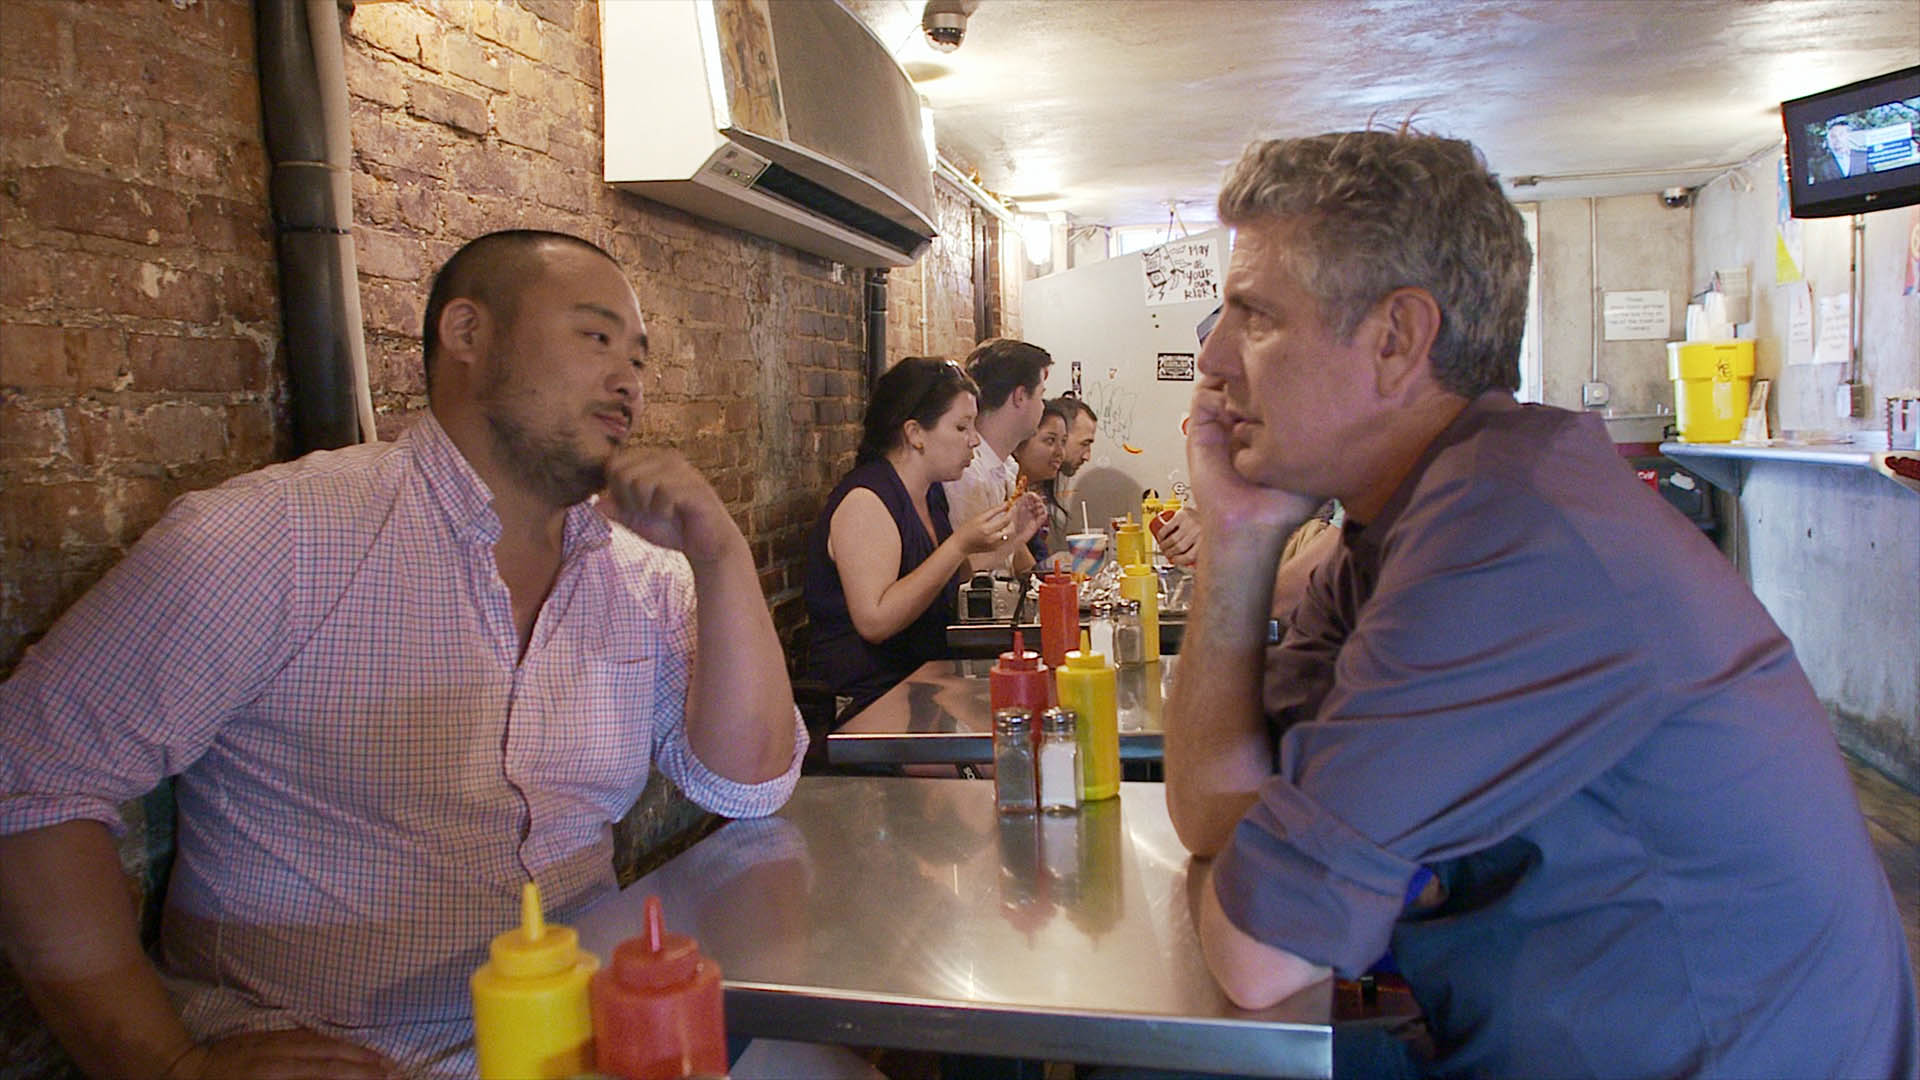 David Chang and Anthony Bourdain sitting at a restaurant table talking